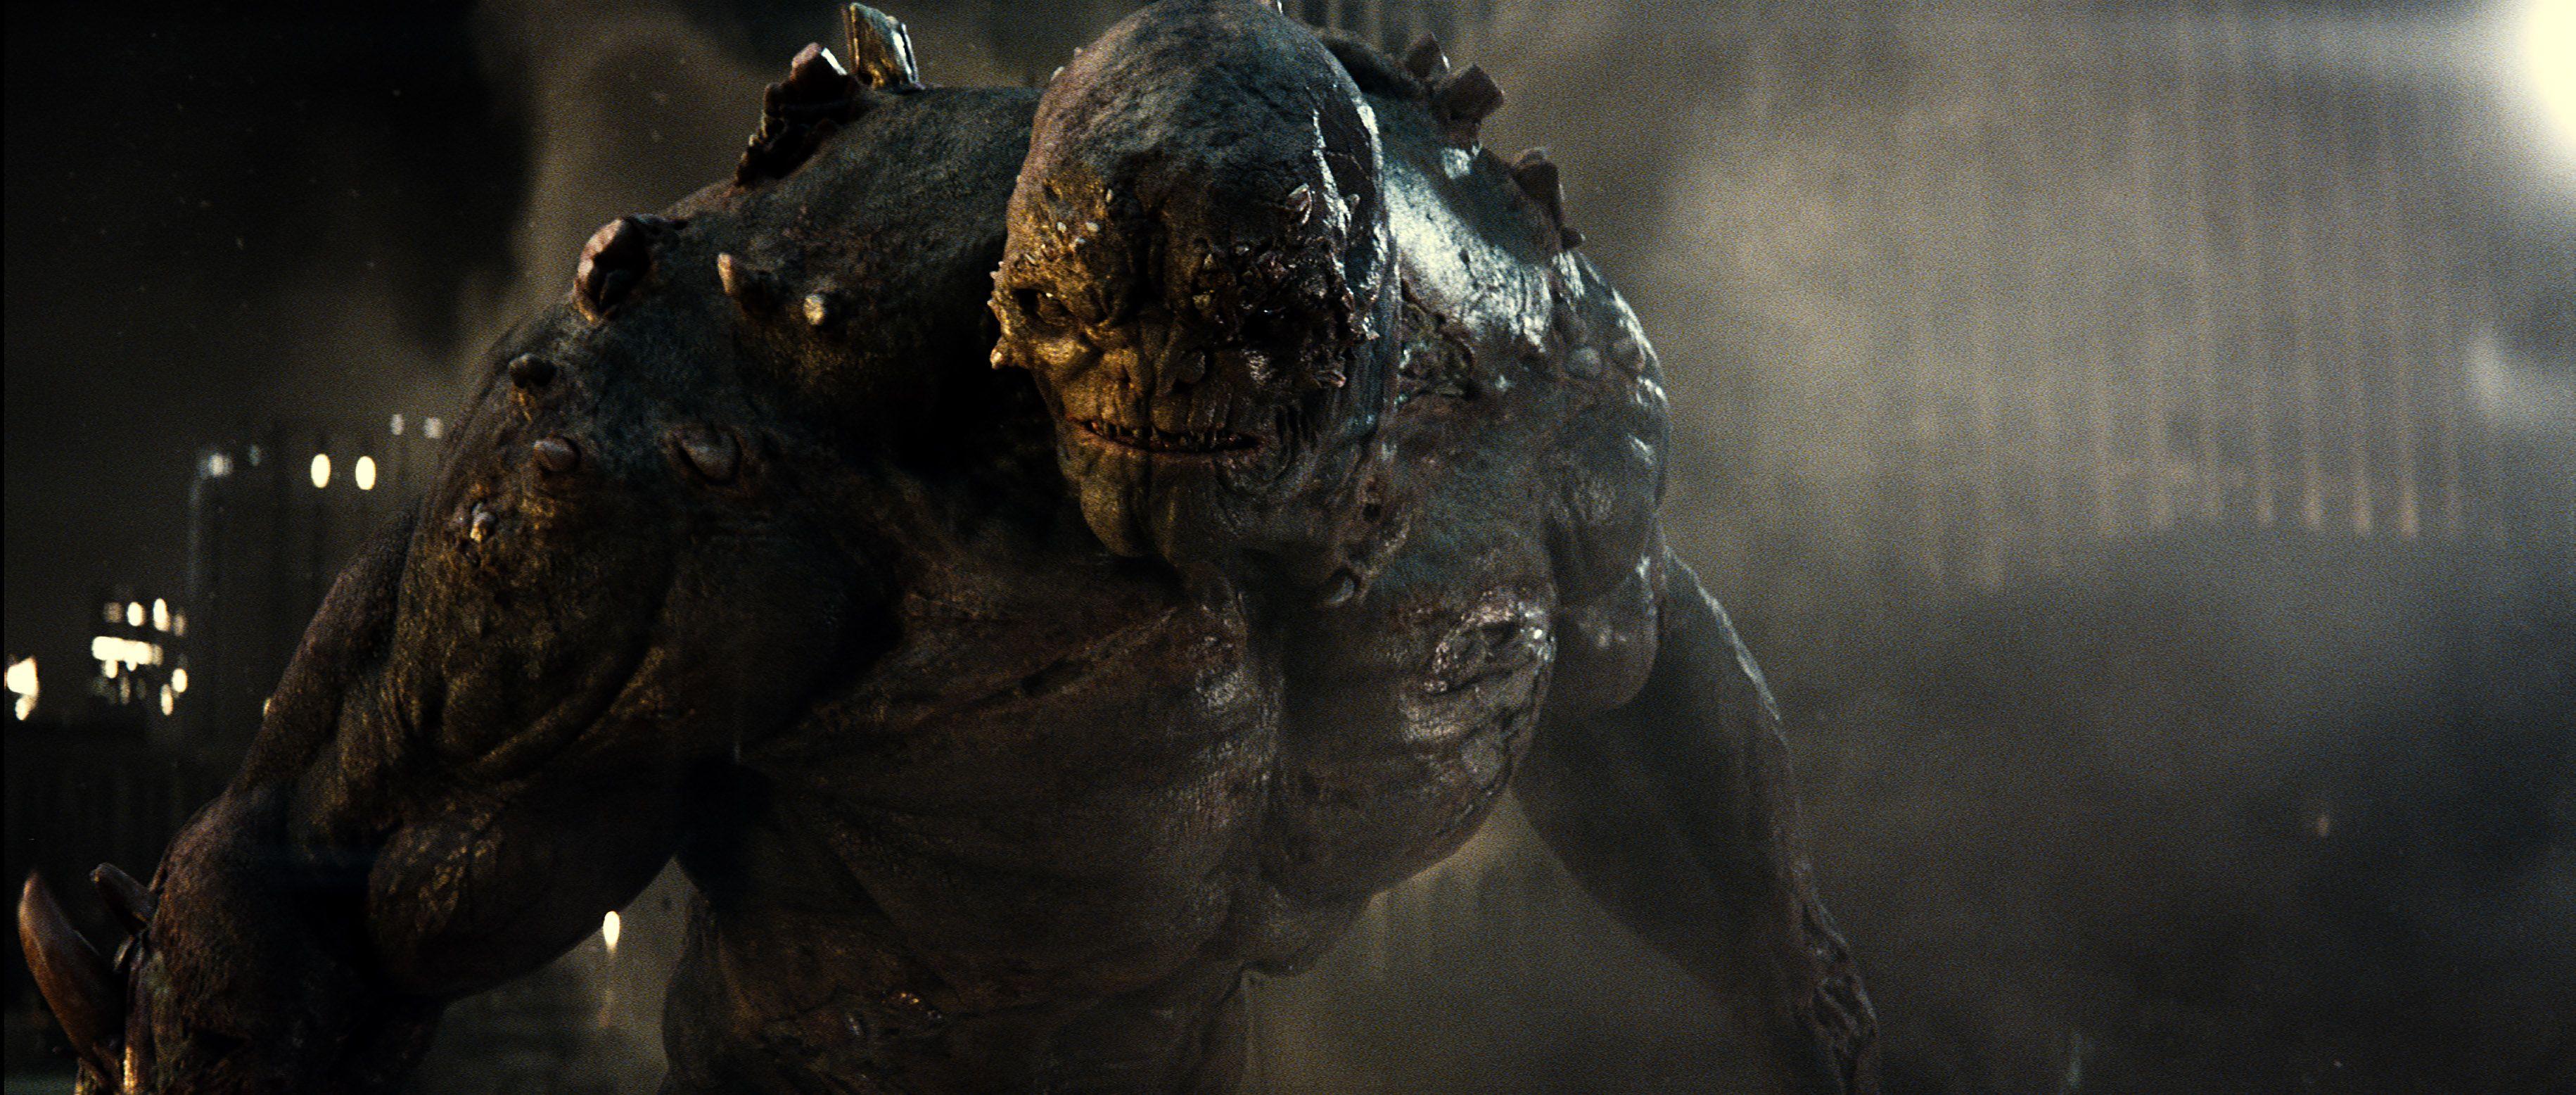 Doomsday (DC Comics) HD Wallpaper and Background